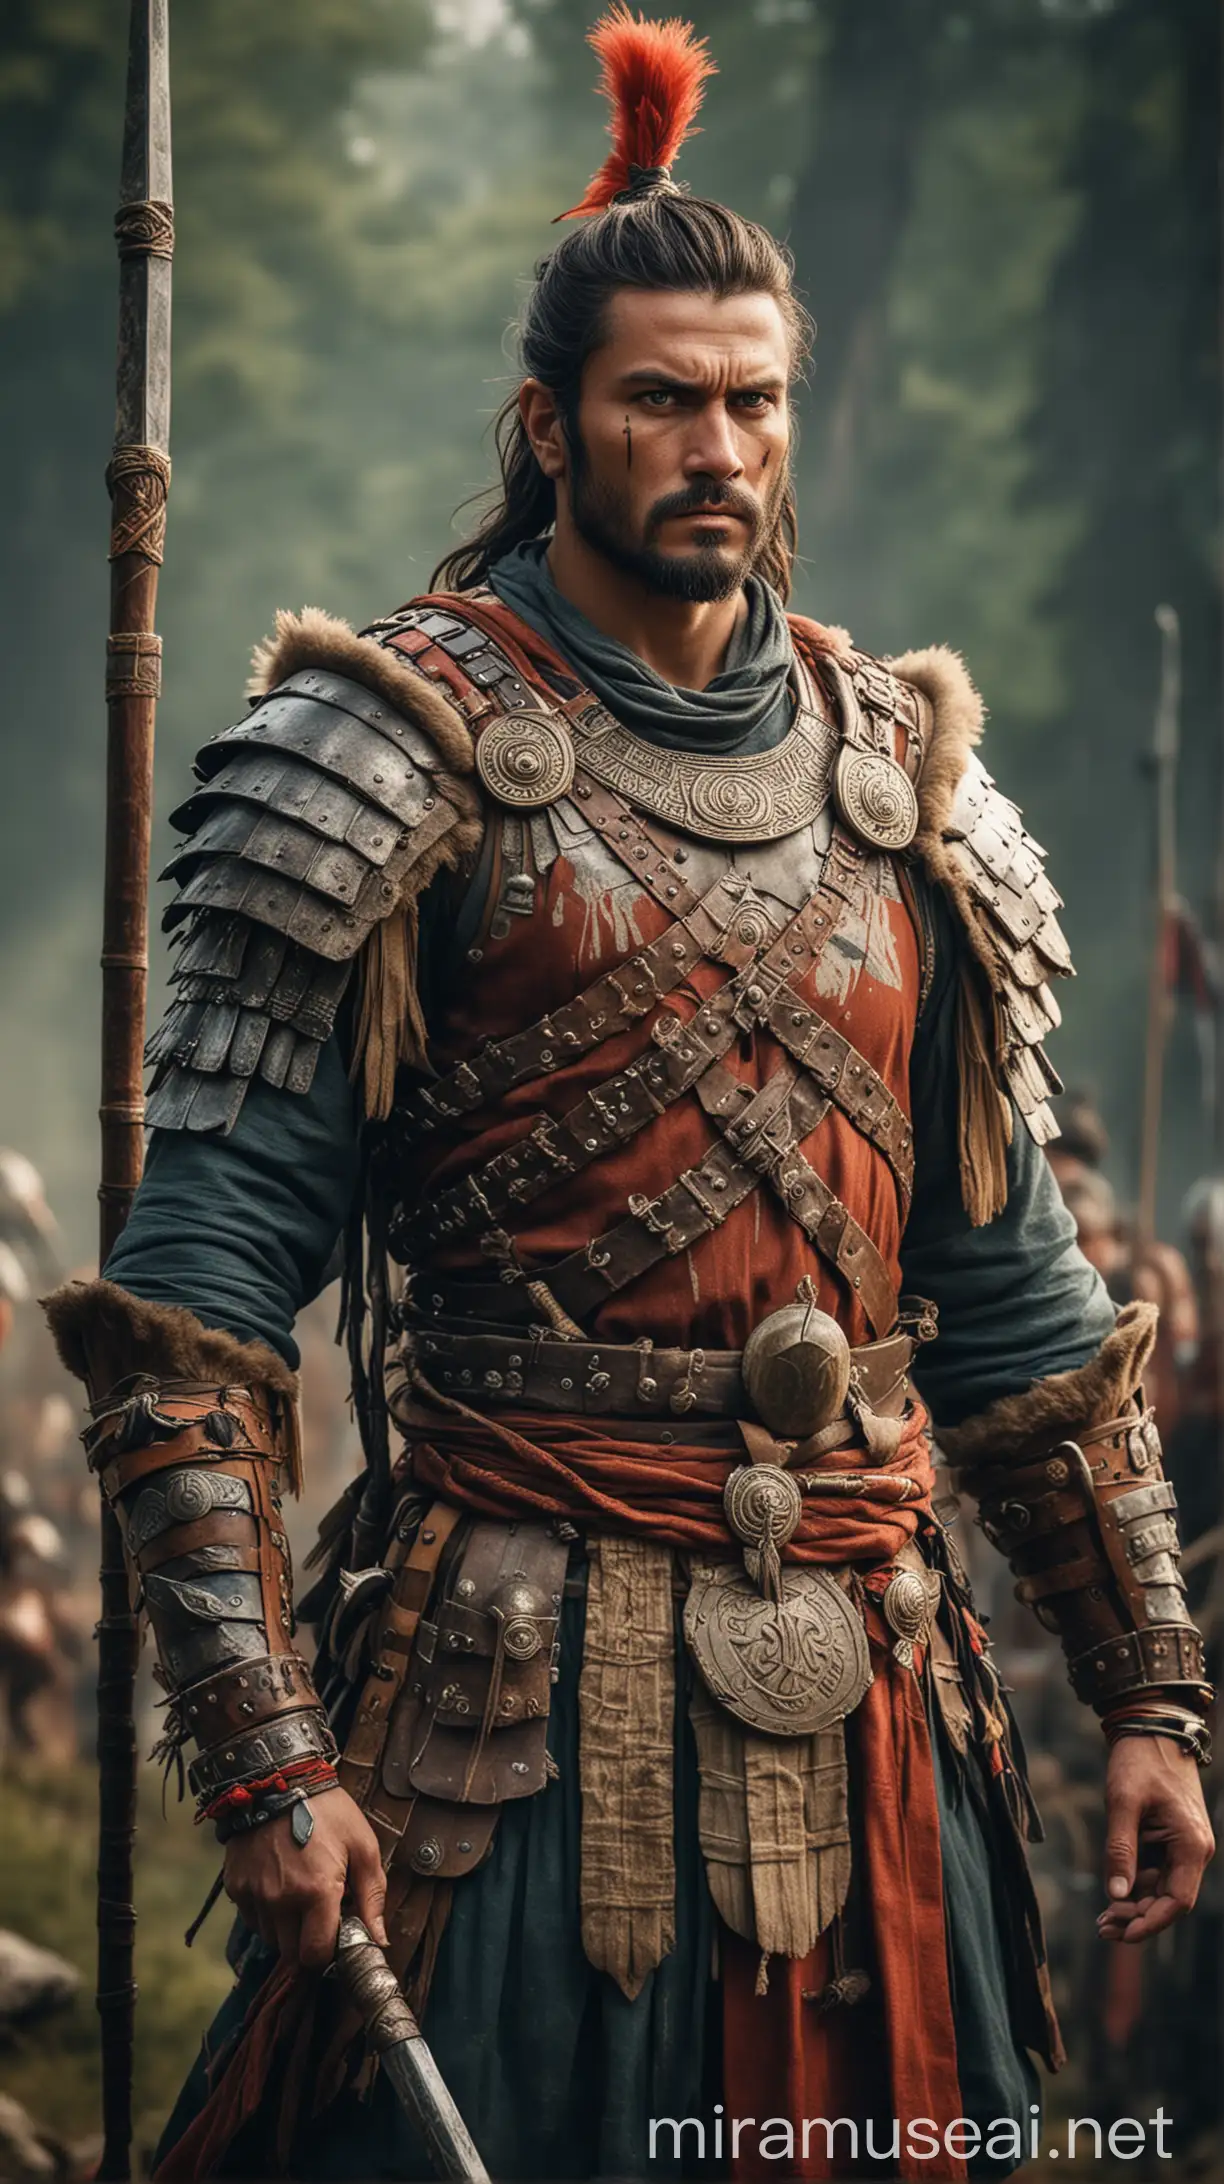 A strong, noble warrior in ancient attire, standing confidently with a fierce yet compassionate expression. He is surrounded by a backdrop of a vibrant, battle-ready clan."In ancient world 
